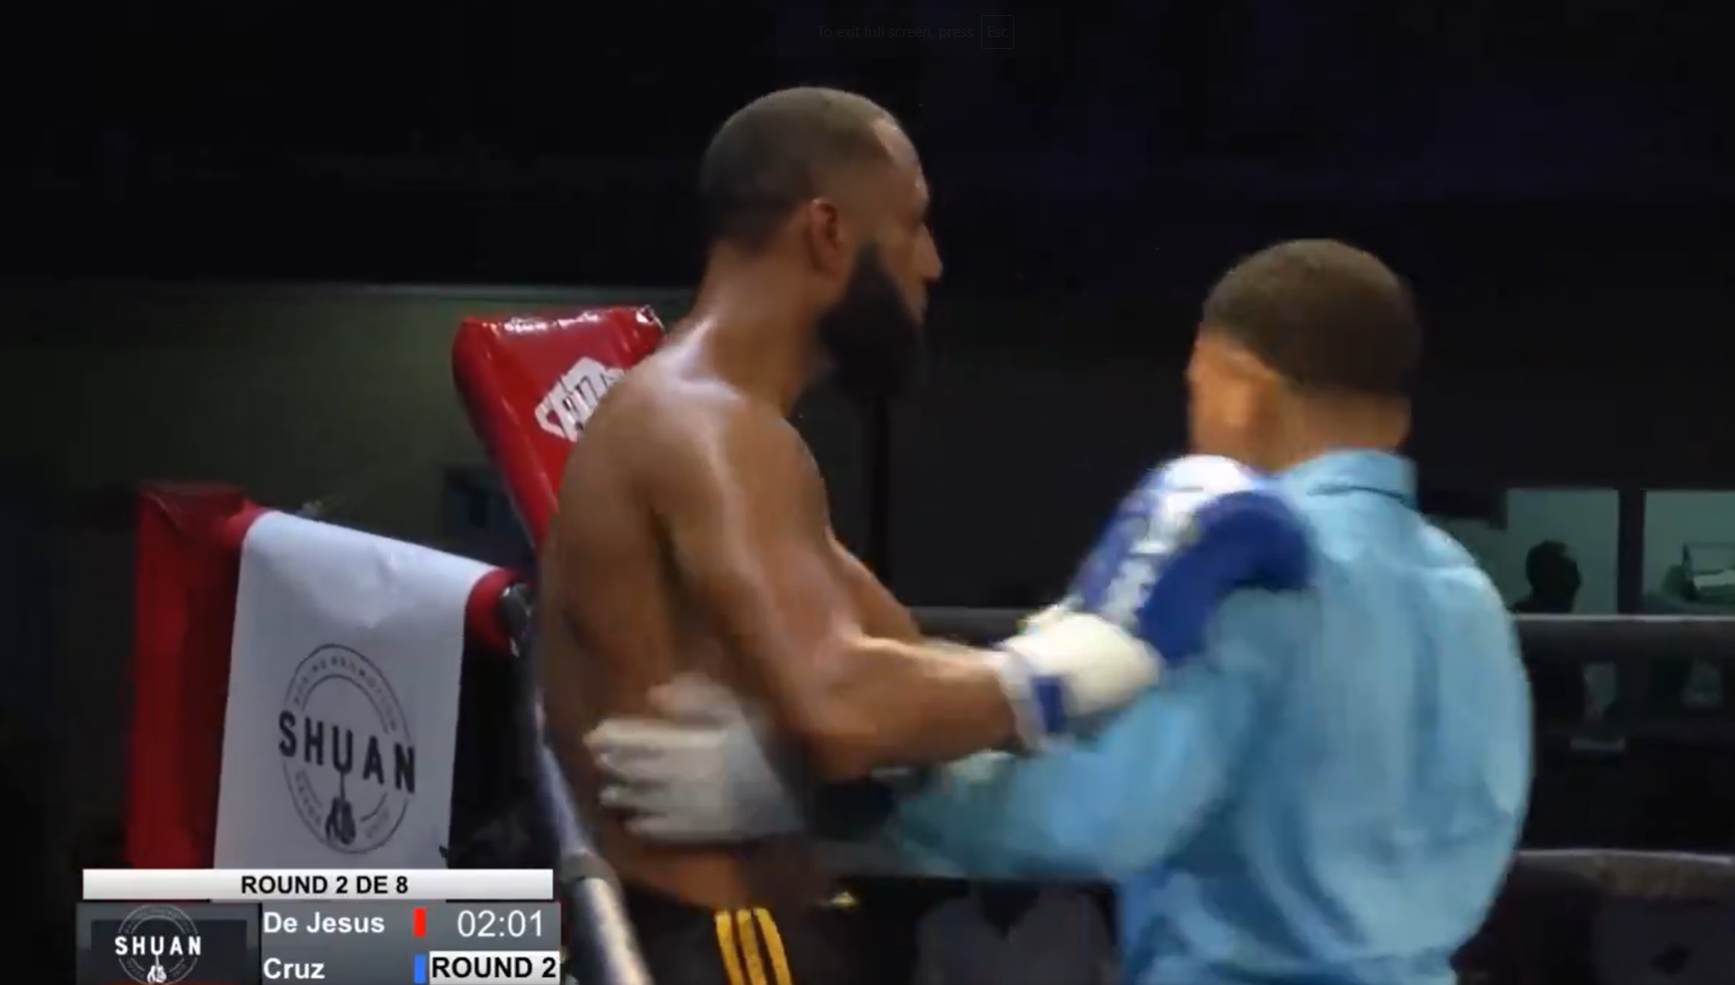 Julio de Jesus Rodriguez pushed the referee after he announced a stoppage